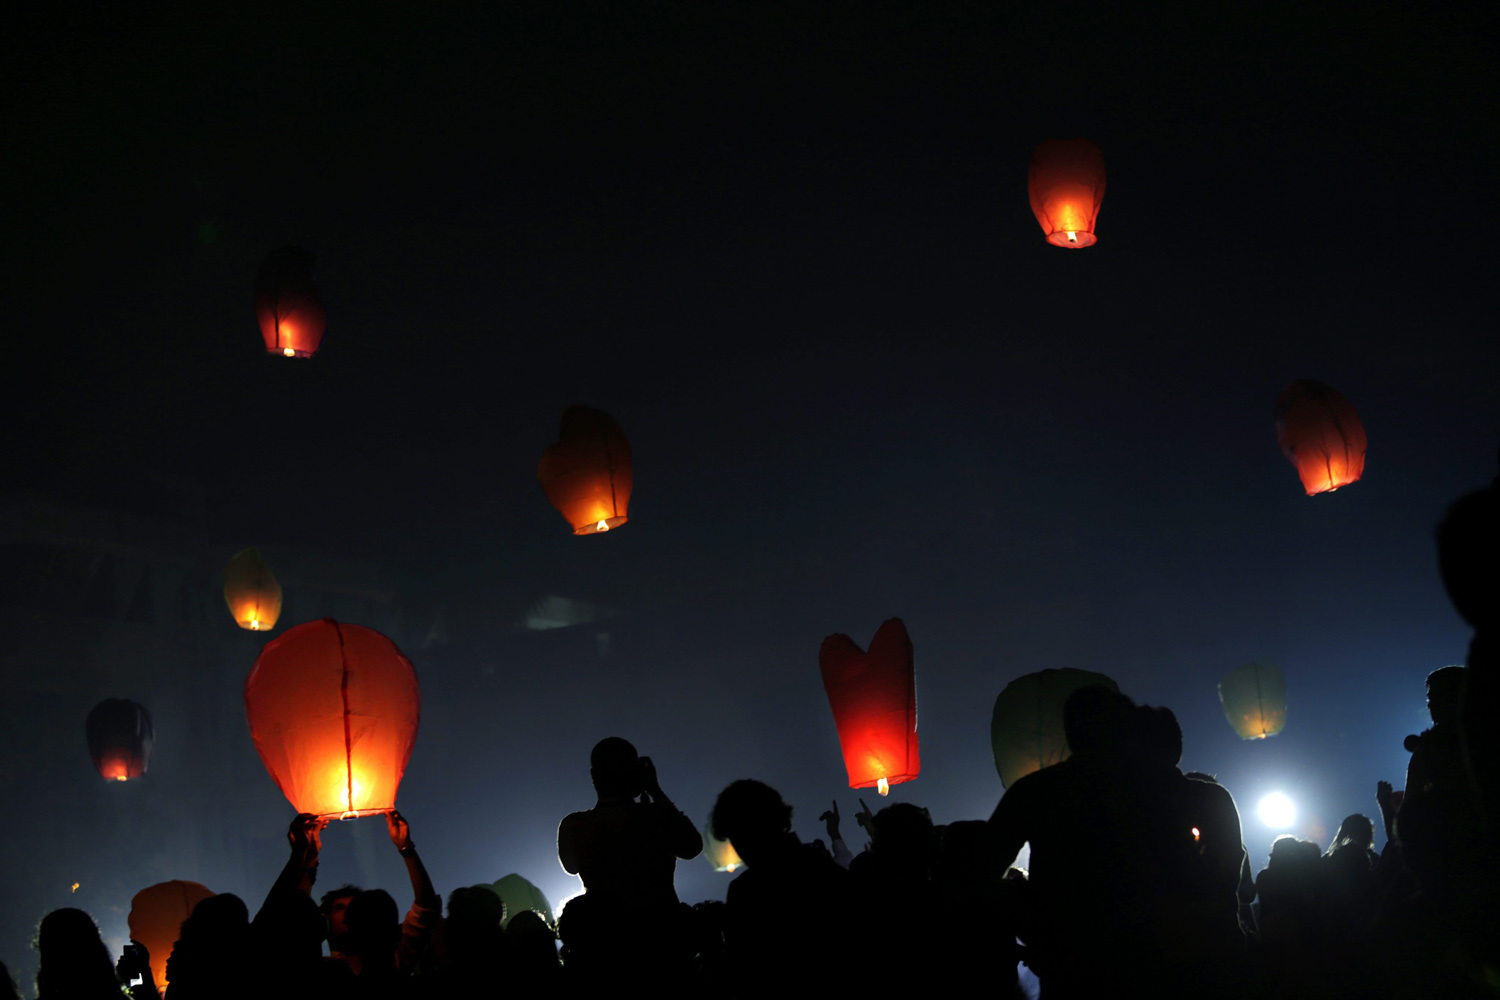 Oct. 30, 2013.  Members of the global youth organization AIESEC celebrate the Diwali festival with glowing sky lanterns to promote eco friendly Diwali in Calcutta, eastern India.